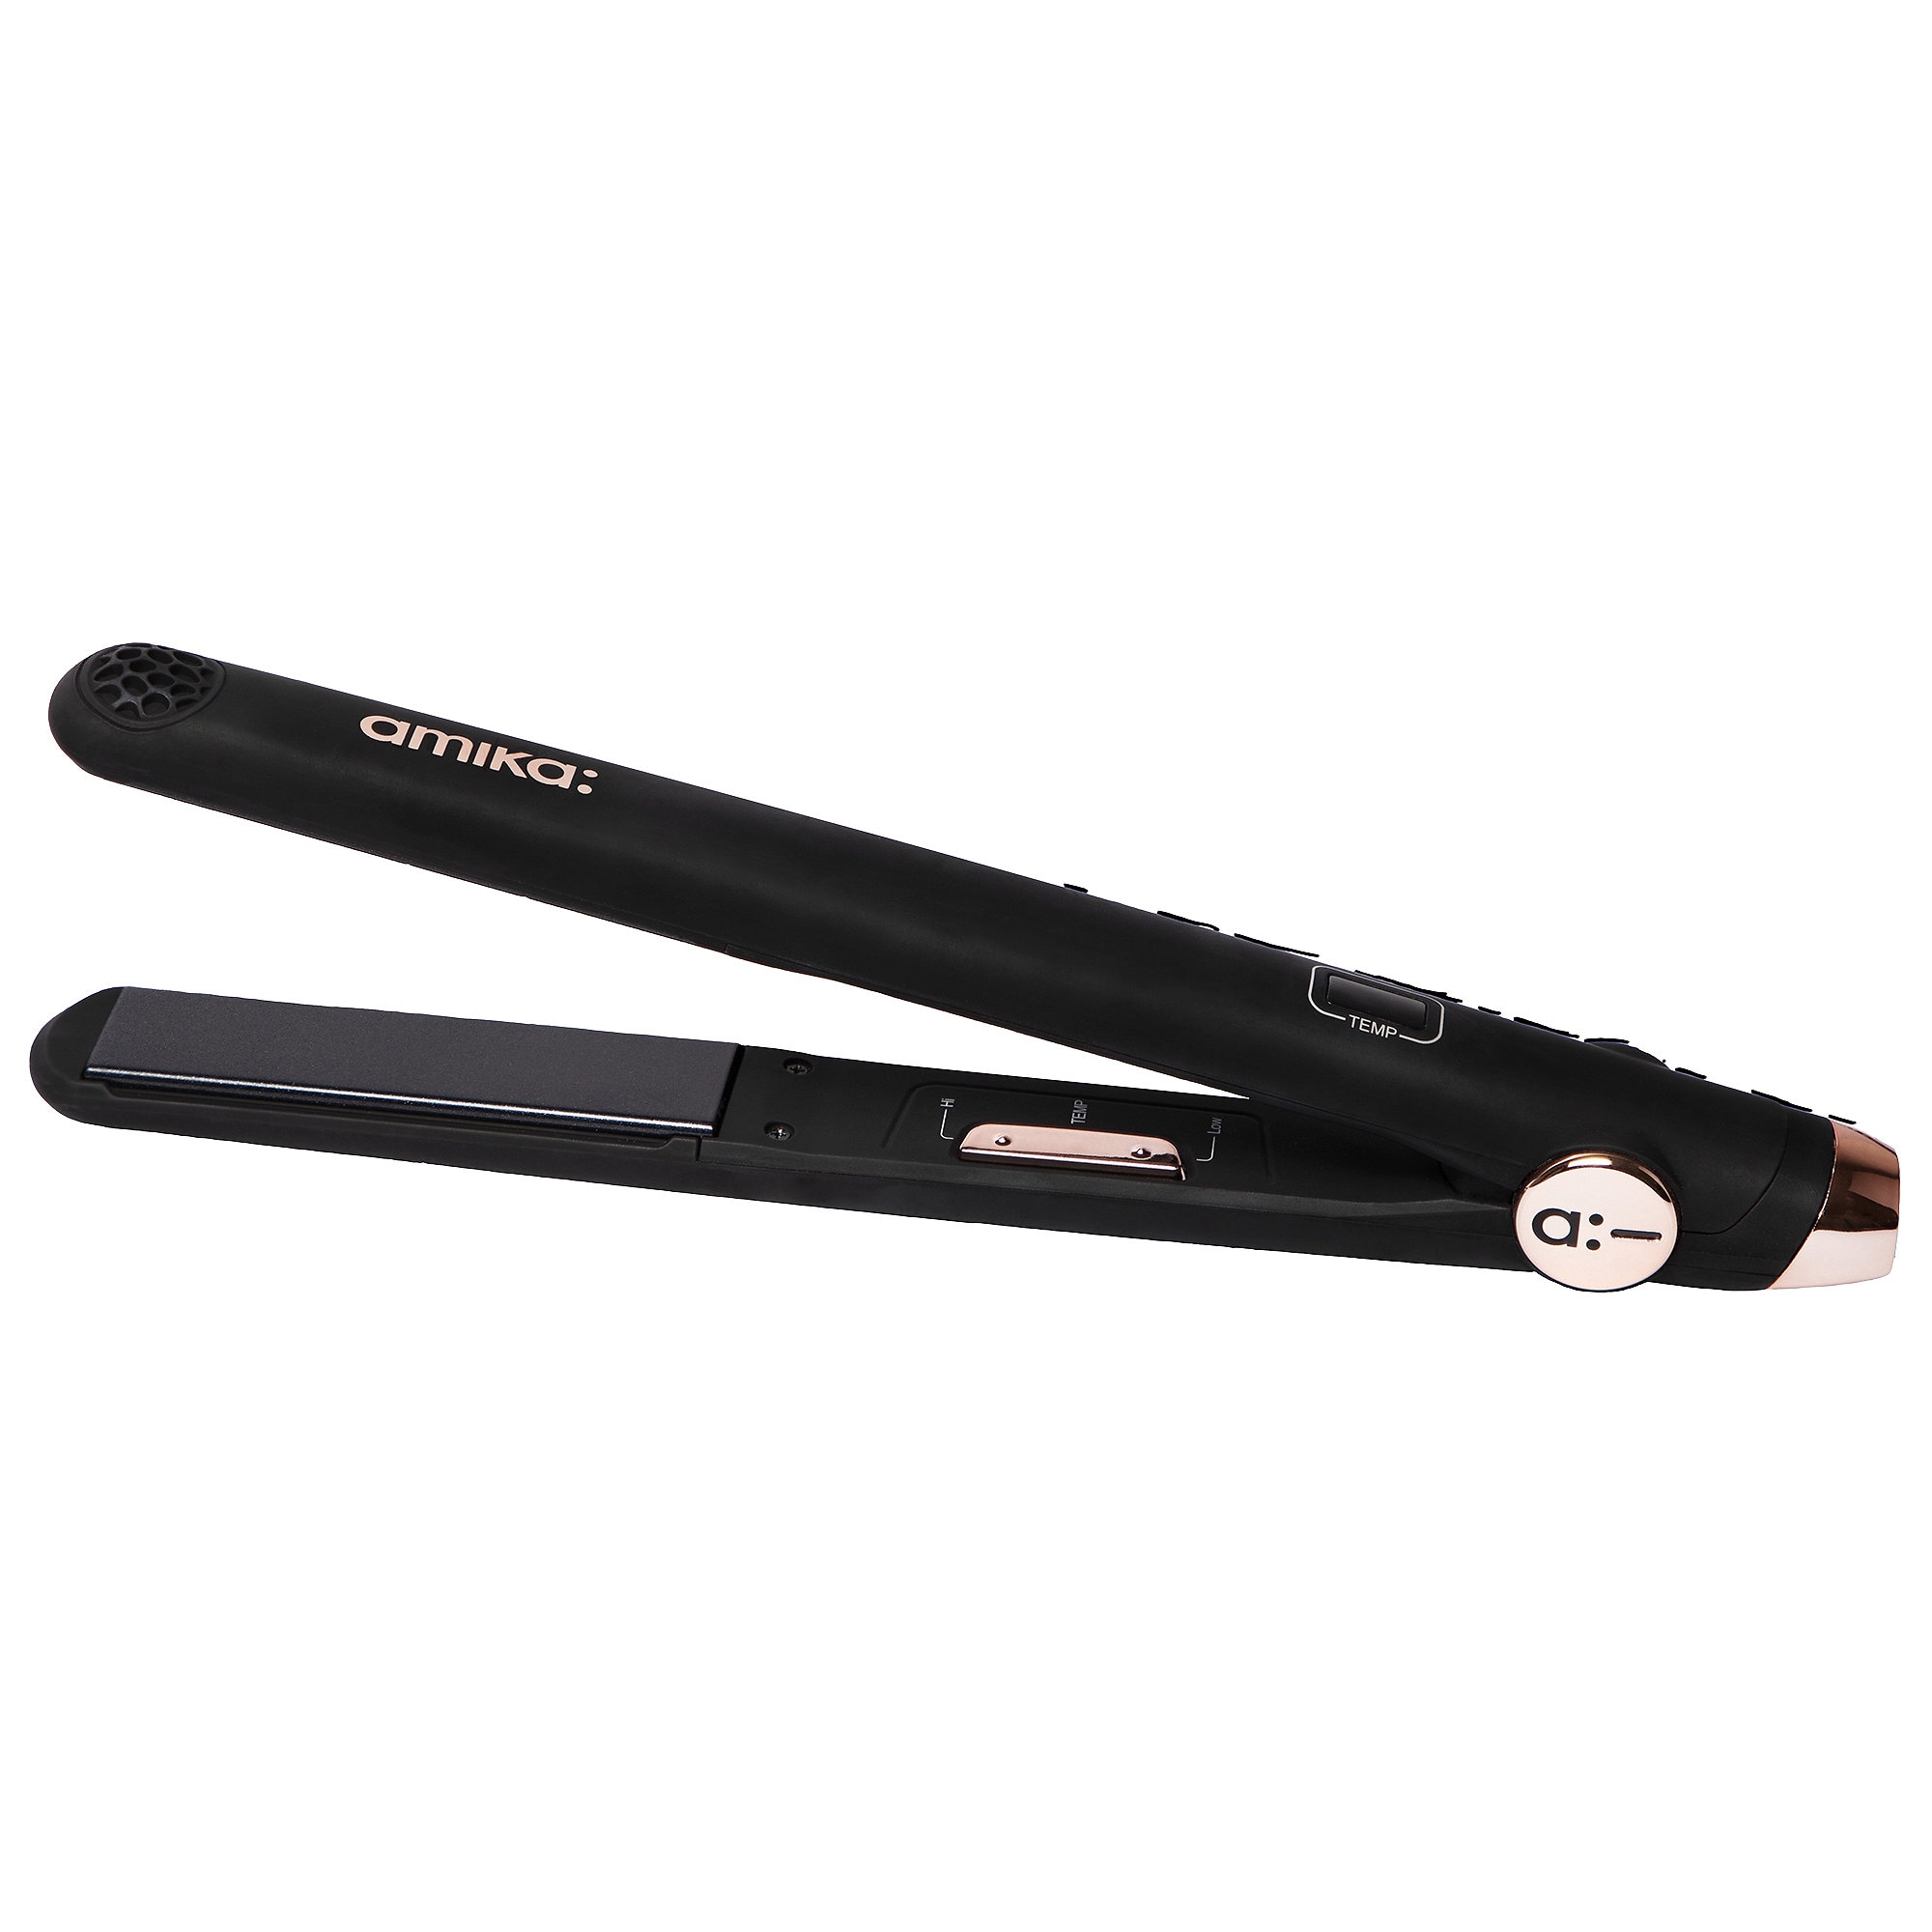 What Can You Do To Save Your Royale Hair Straightener From Destruction By Social Media?